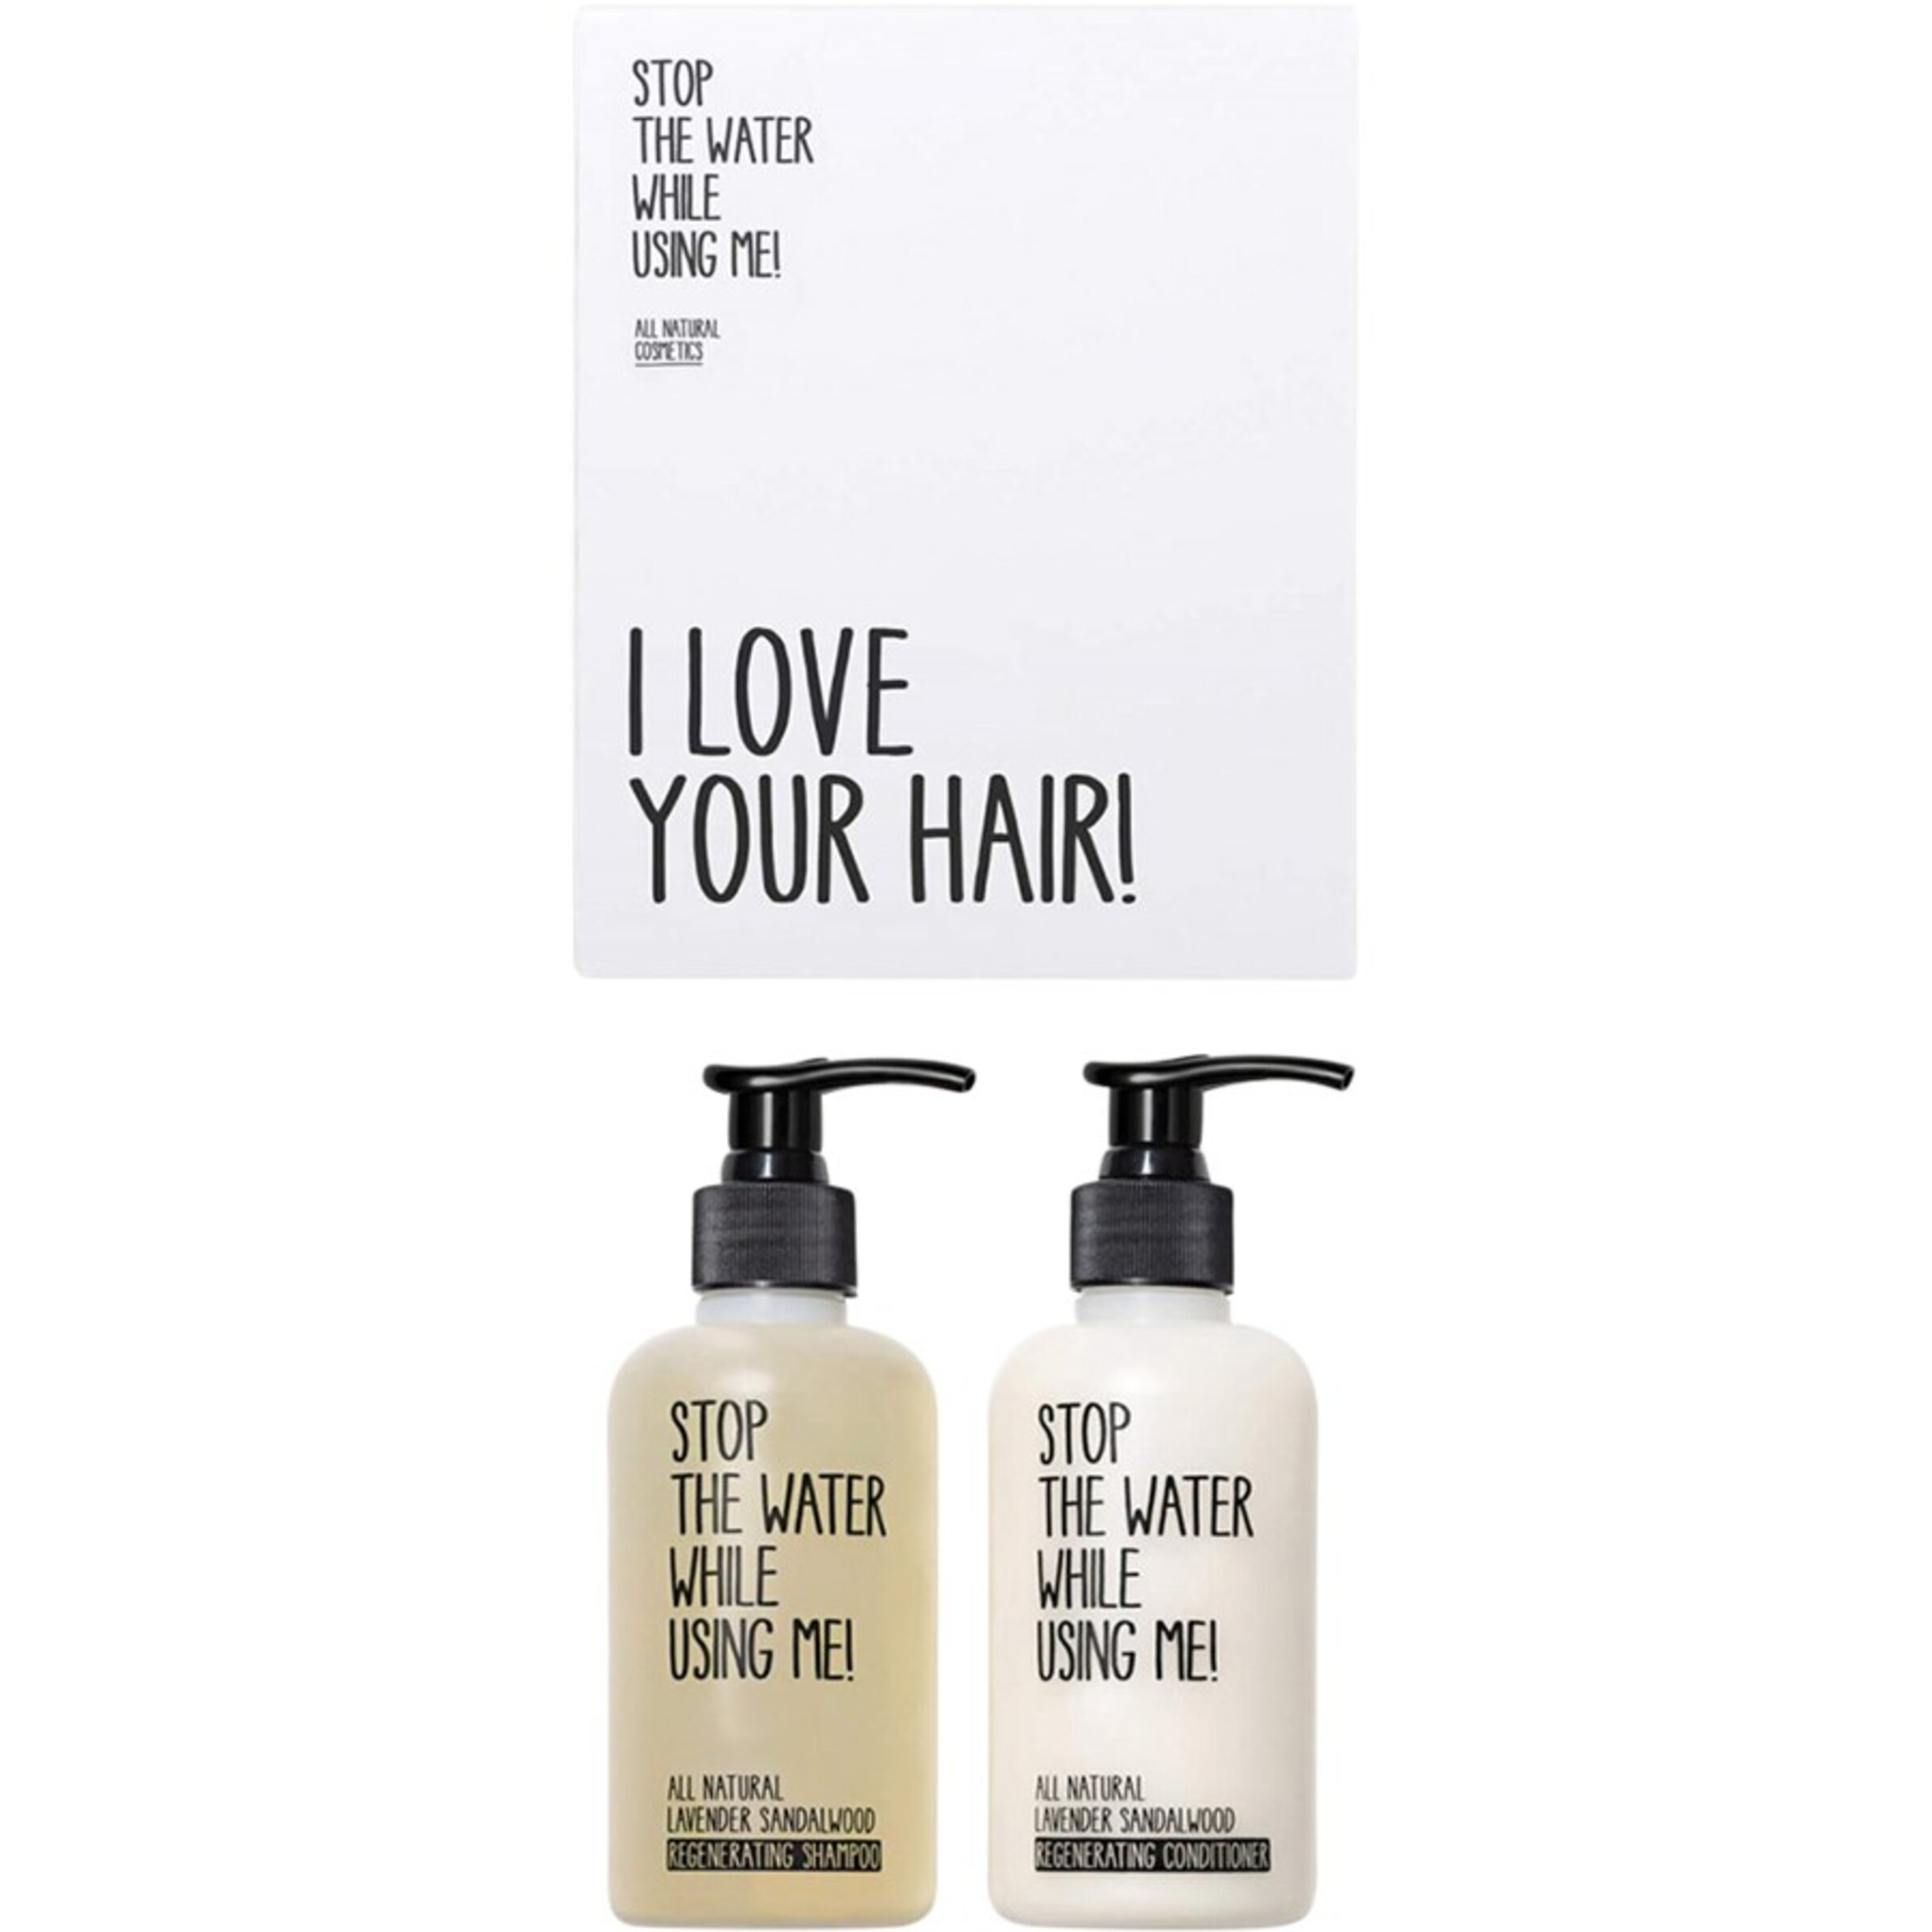 STOP THE WATER WHILE USING ME  Set Lavender Sandalwood in 